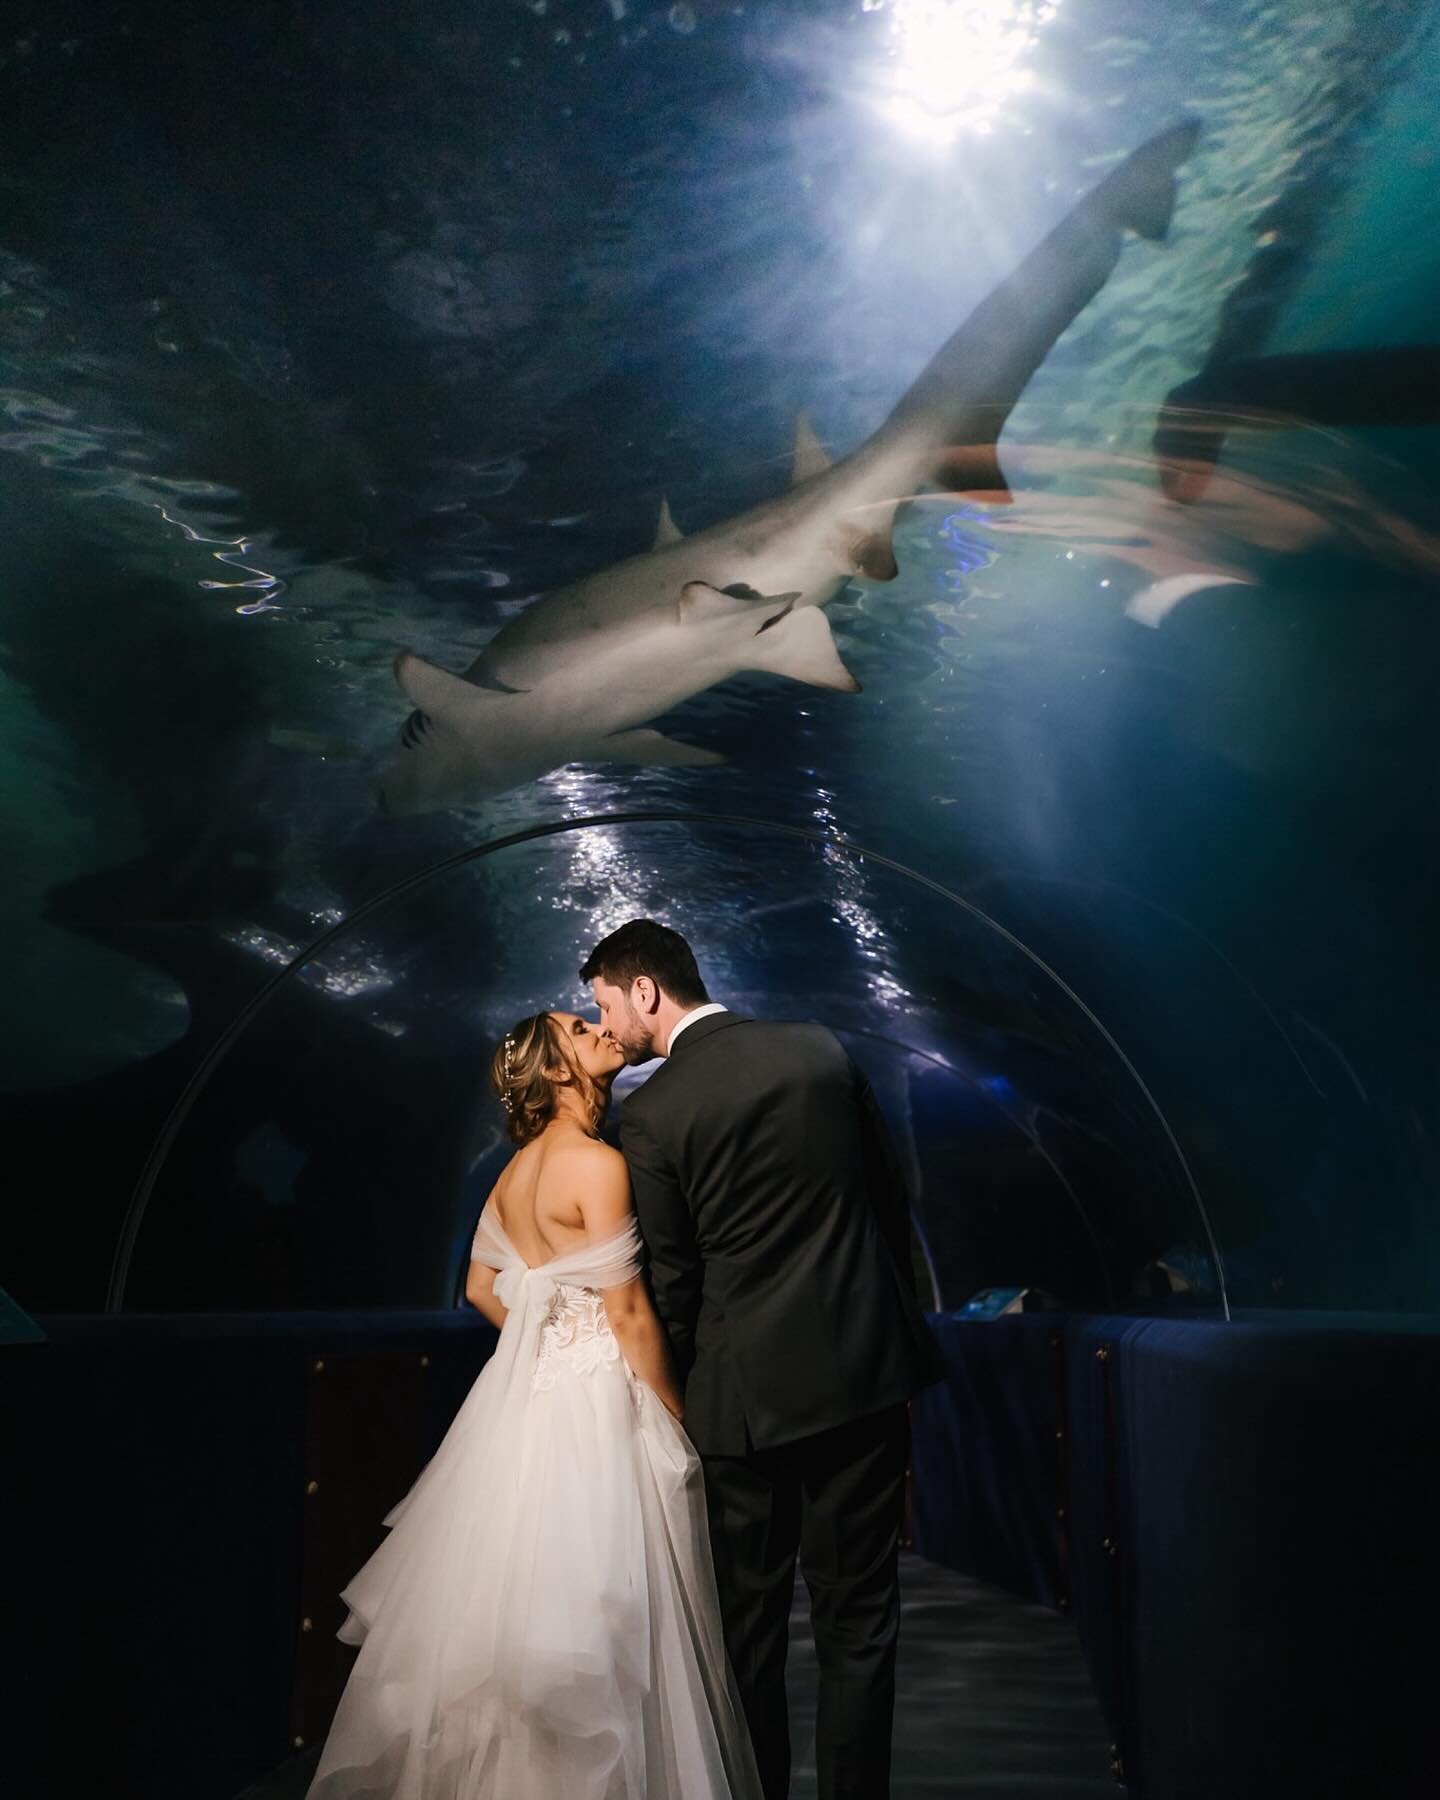 Fun couple ✅ Amazing spring weather ✅ Photos with sharks ✅ &hellip; perfect way to kickoff spring weddings 🤩 Had such a great time celebrating Rachel + Brad! 💛